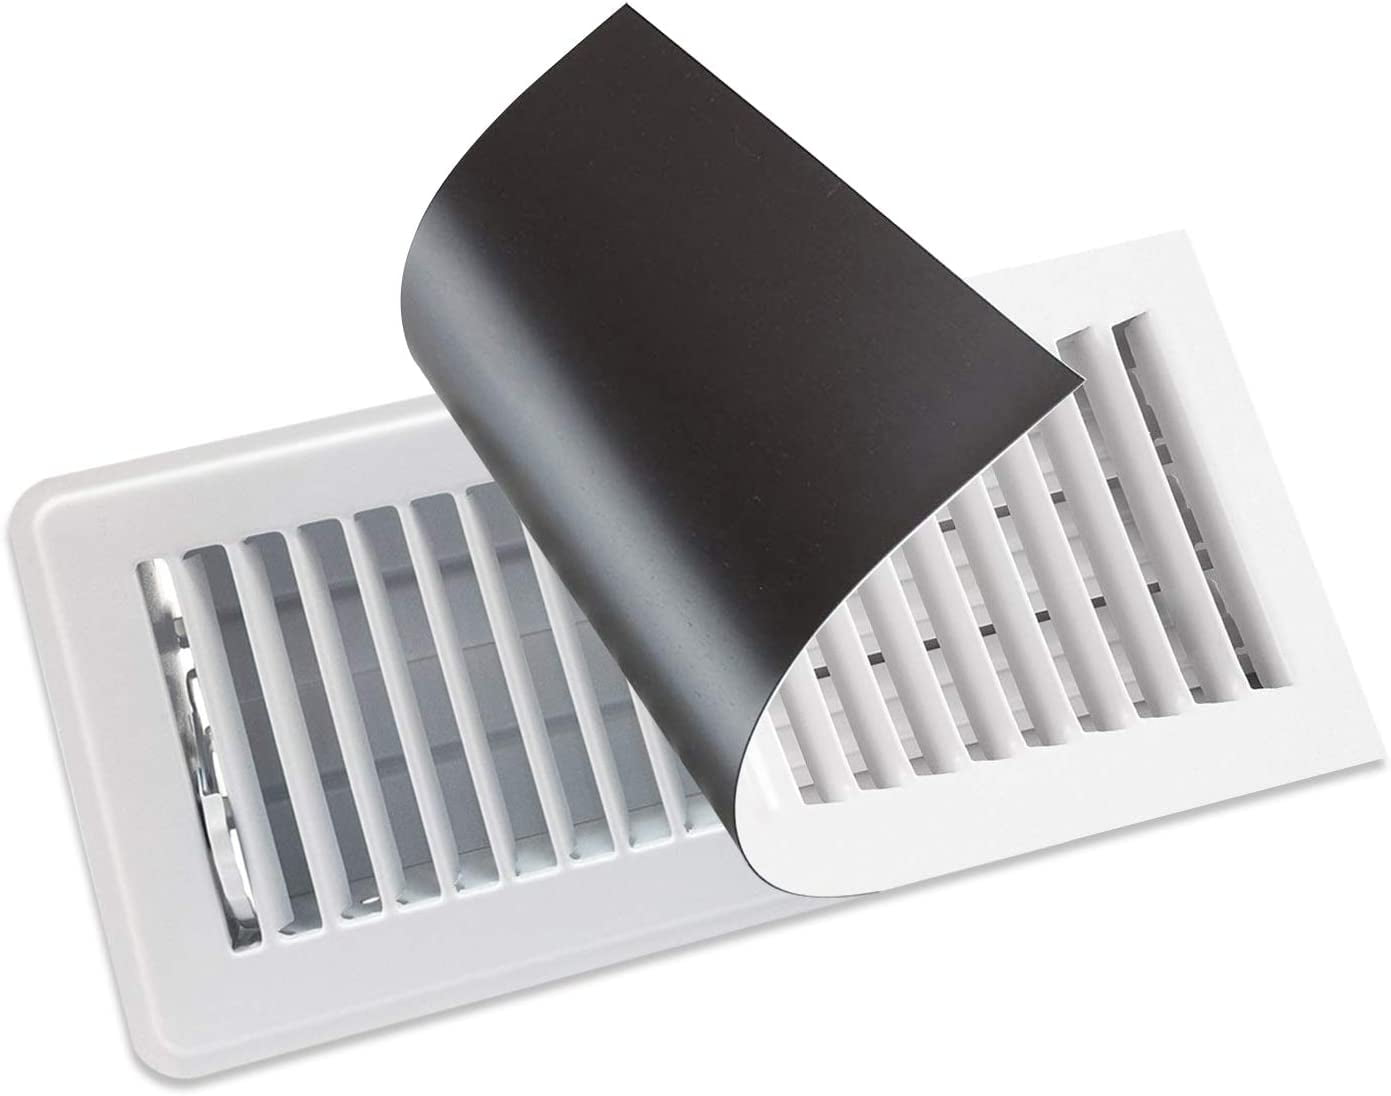 Magnetic Vent Covers (3-pack) - for Registers of Width 3.25 to 4, Length 13.25 to 14 (Black)